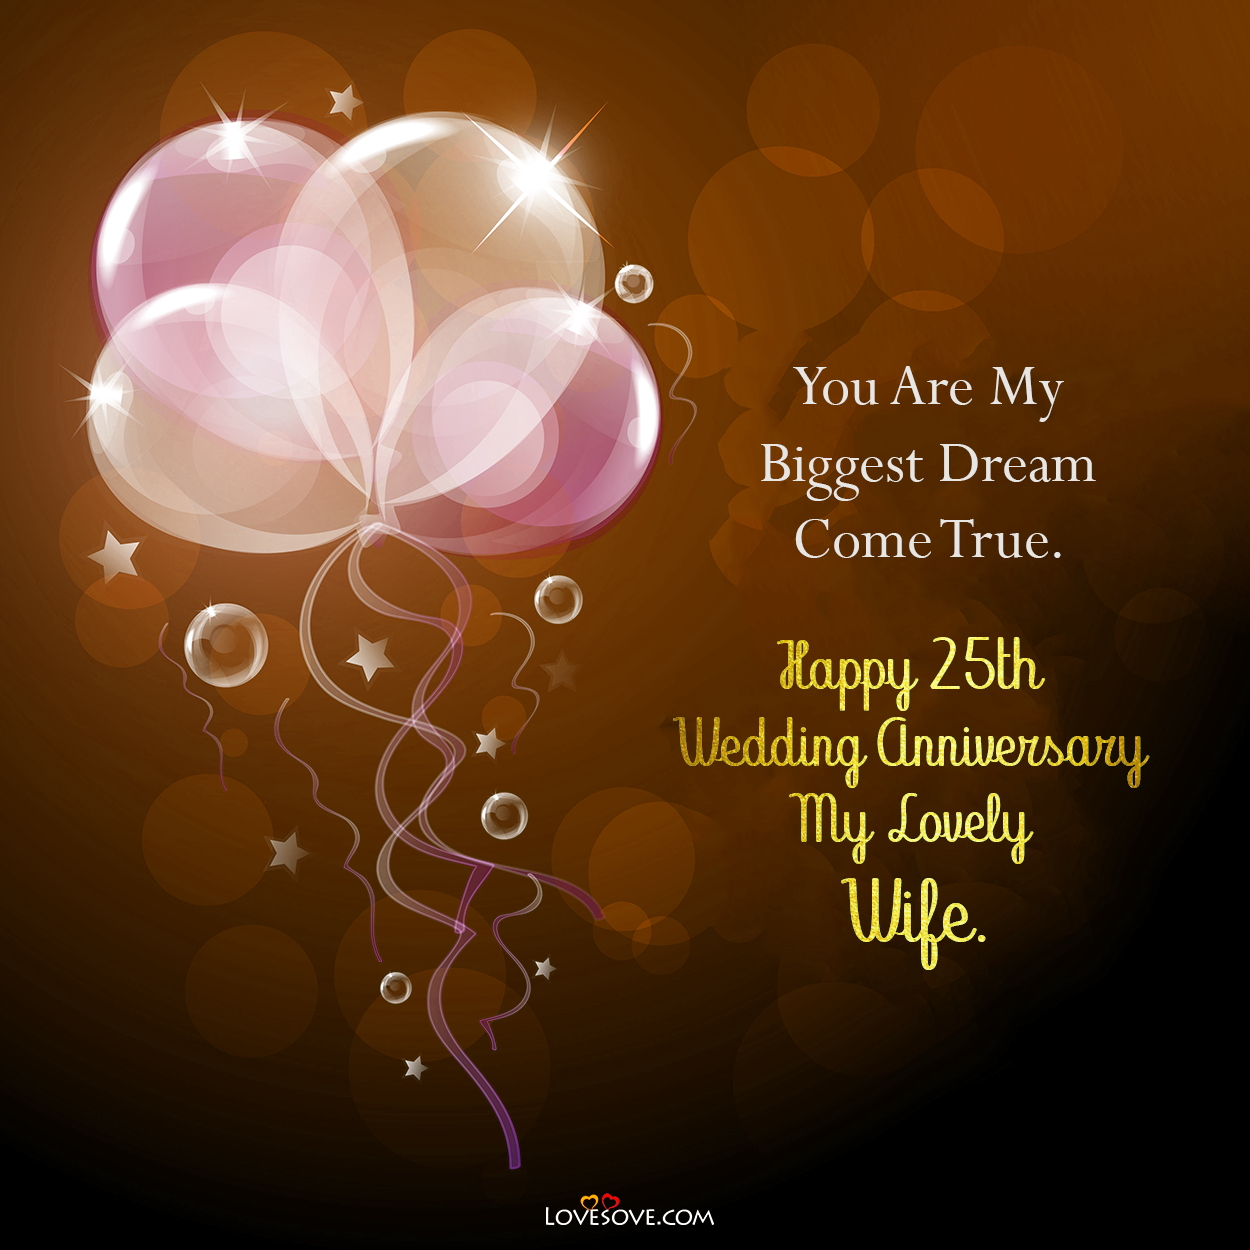 25th wedding anniversary quotes for wife, silver jubilee anniversary wishes